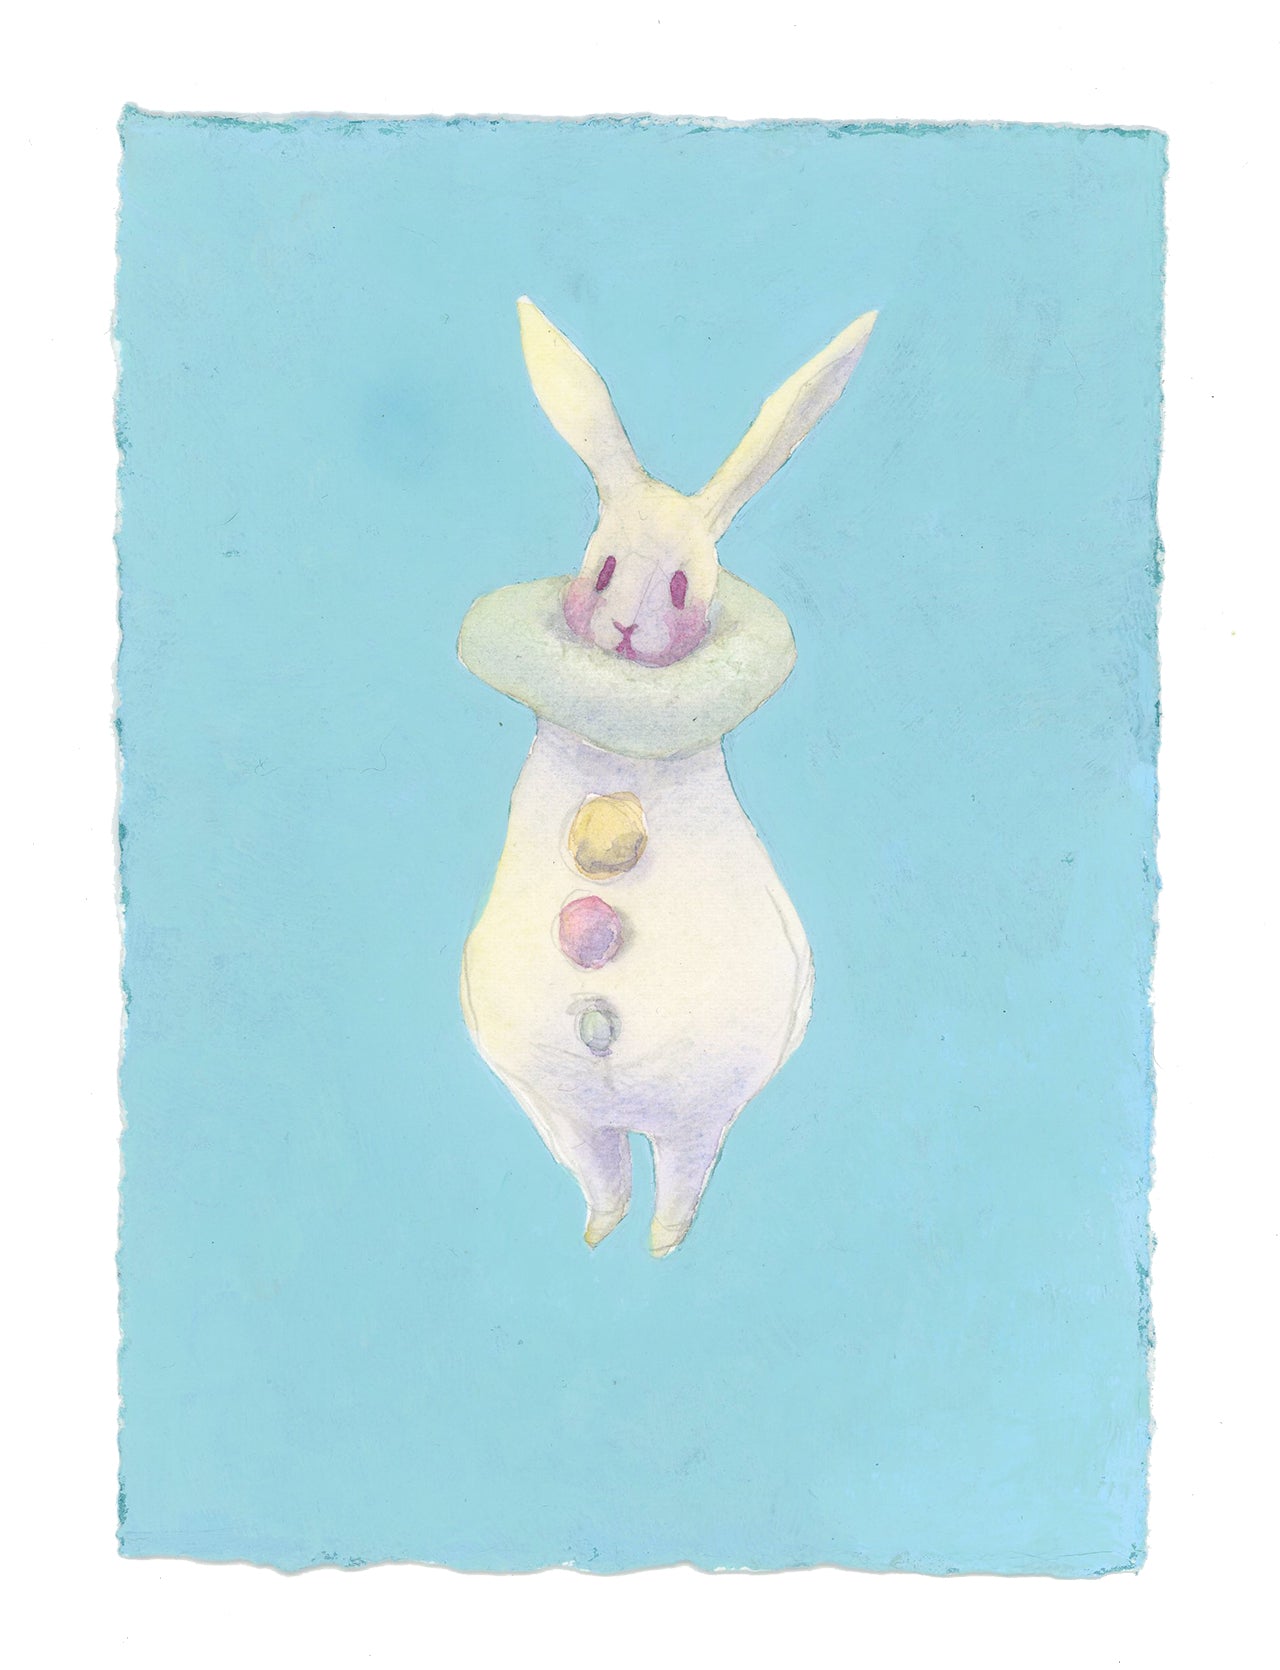 Watercolor #13: "Bunny Pierrot #9"  [5 x 7 inches, Watercolor and Gouache on BFK Rives Paper]